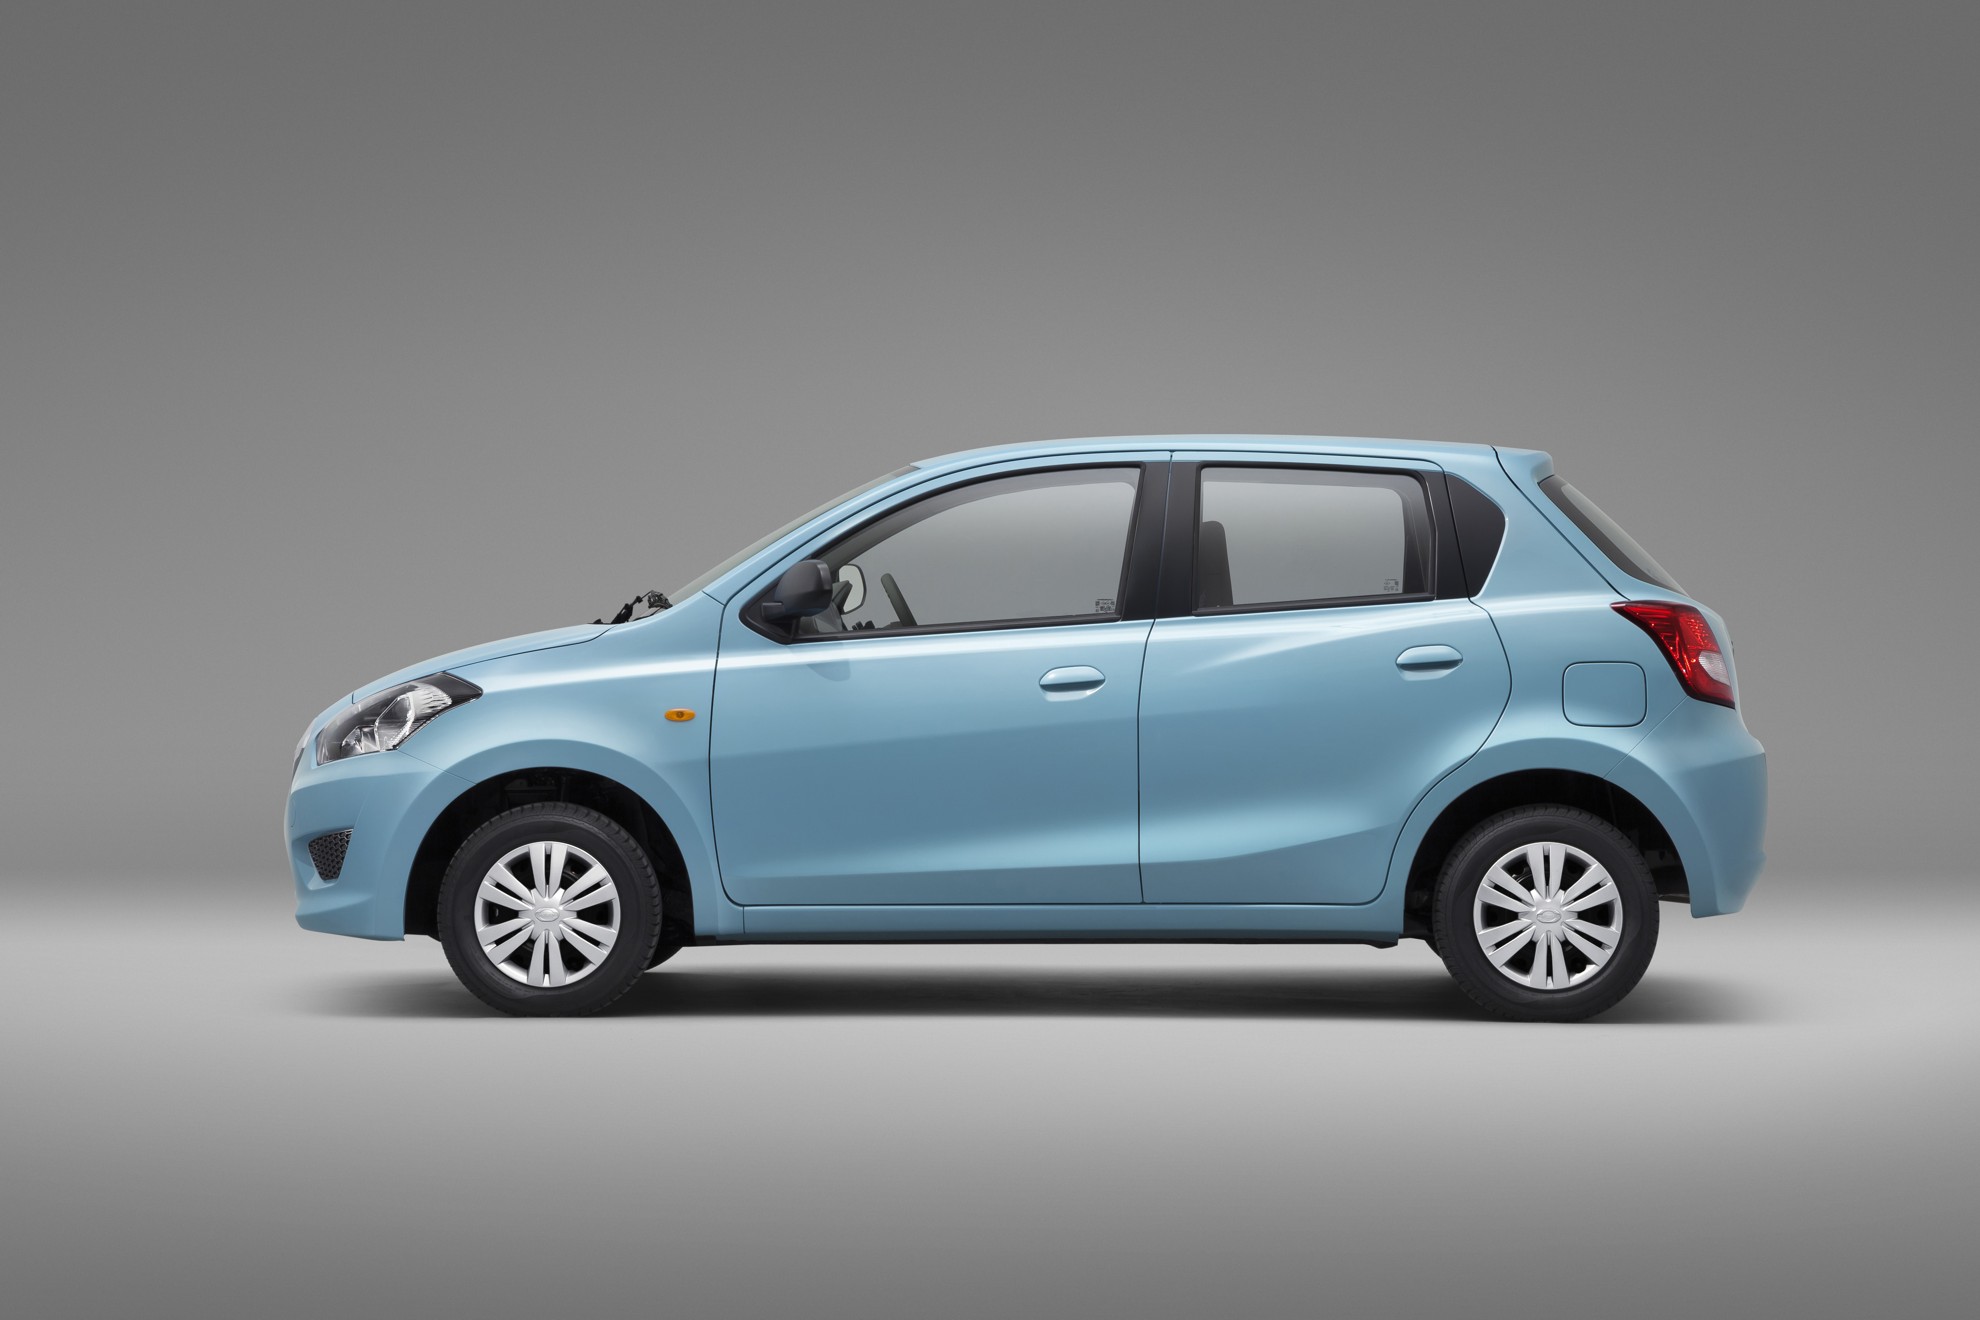 Datsun GO revealed in South Africa